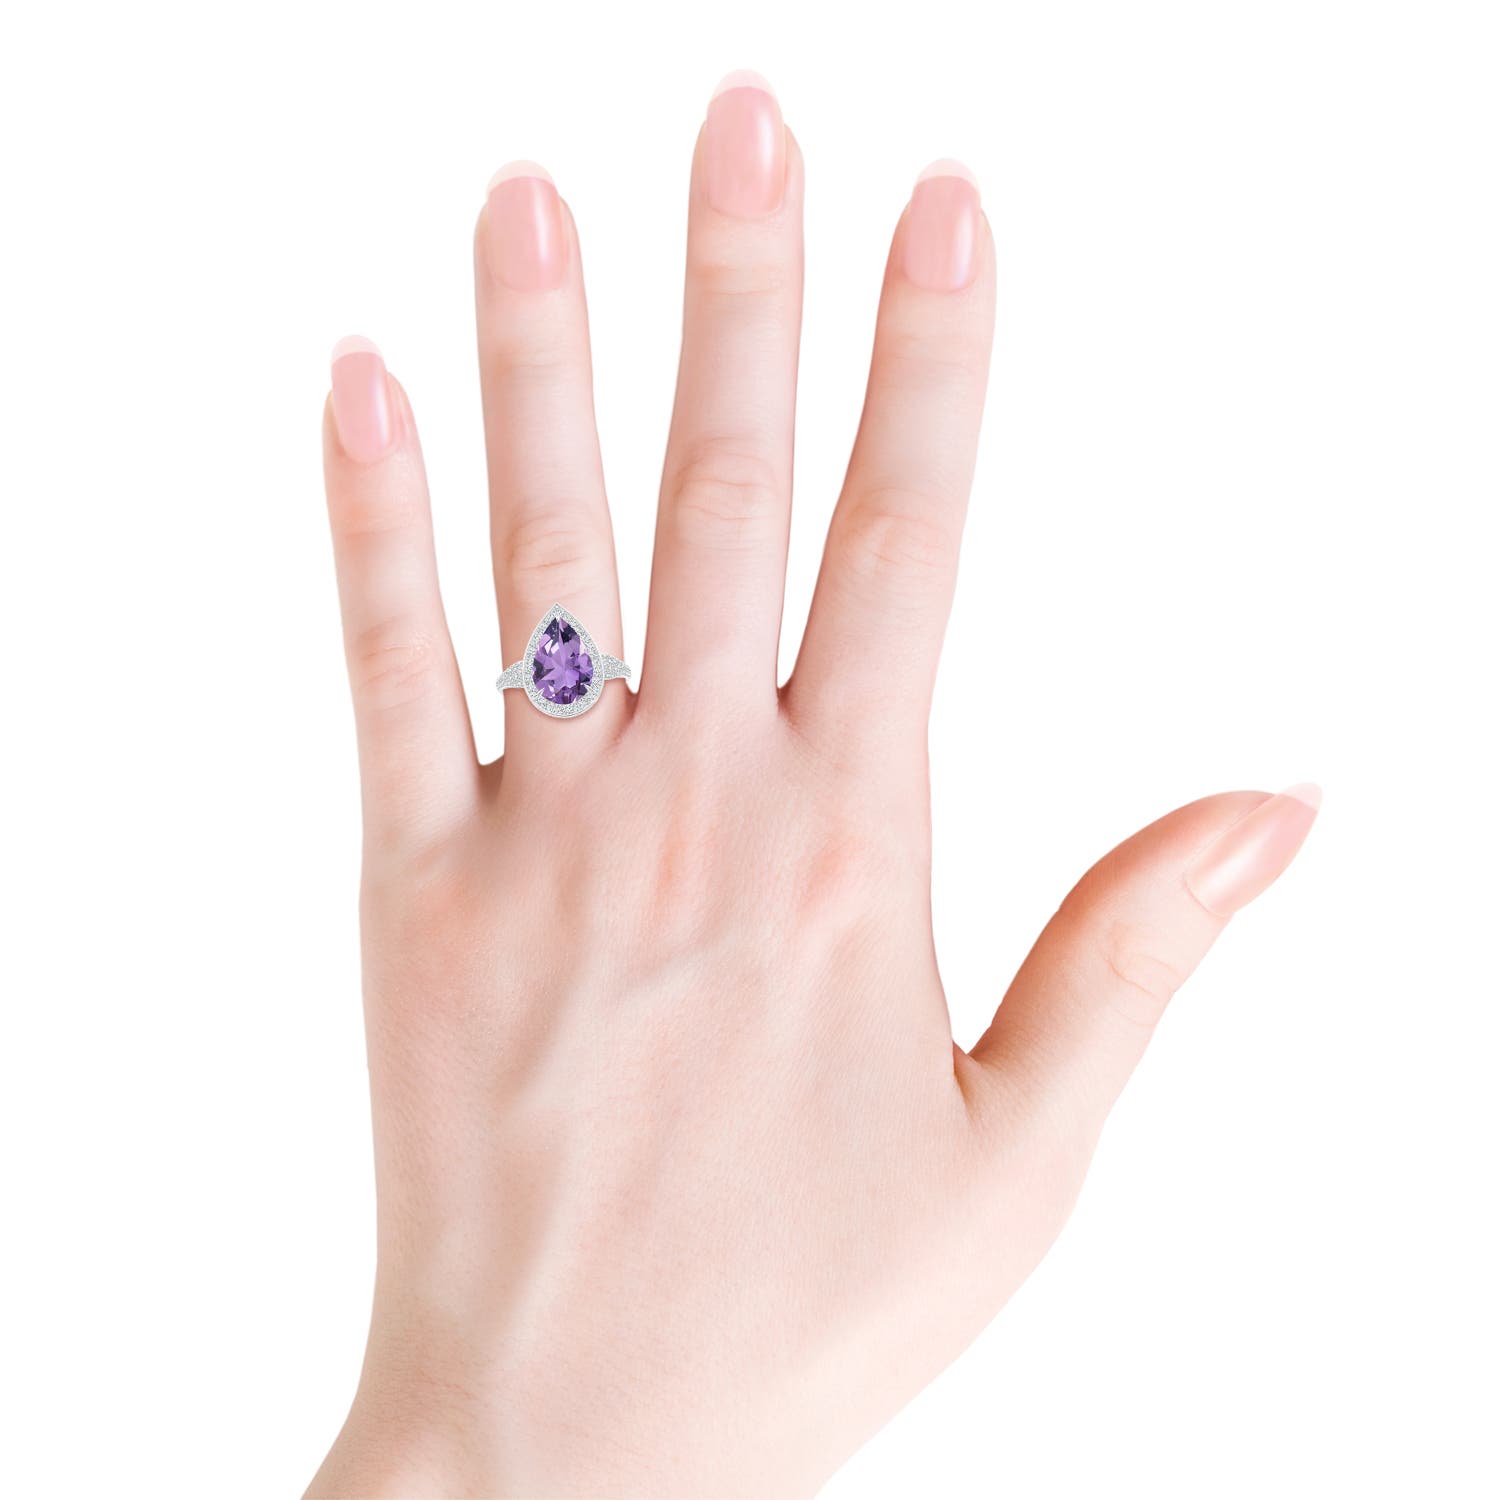 A - Amethyst / 3.07 CT / 14 KT White Gold